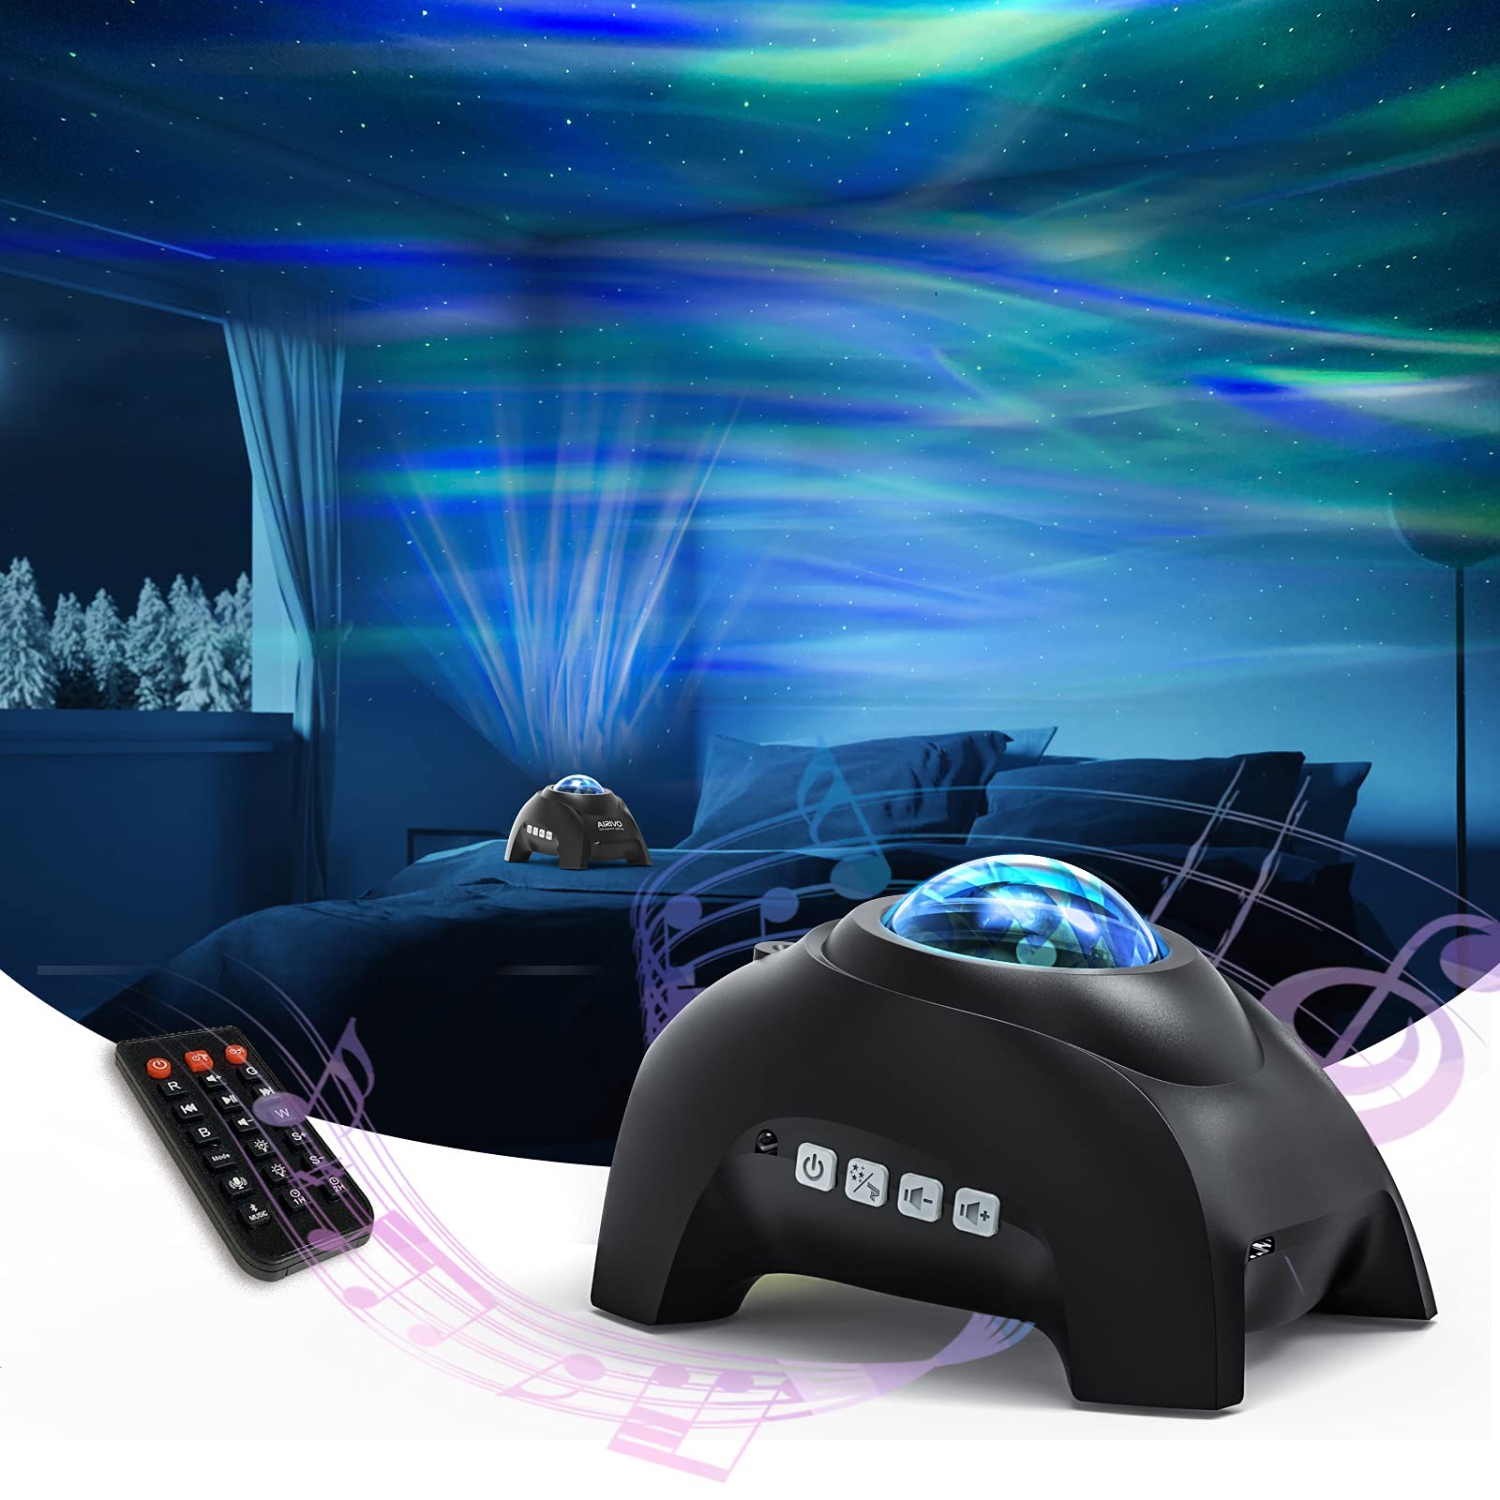 Northern Lights Aurora Projector, AIRIVO Galaxy Projector Music Speaker  with White Noise, Star Projector Night Light for Kids Adults, Star Light